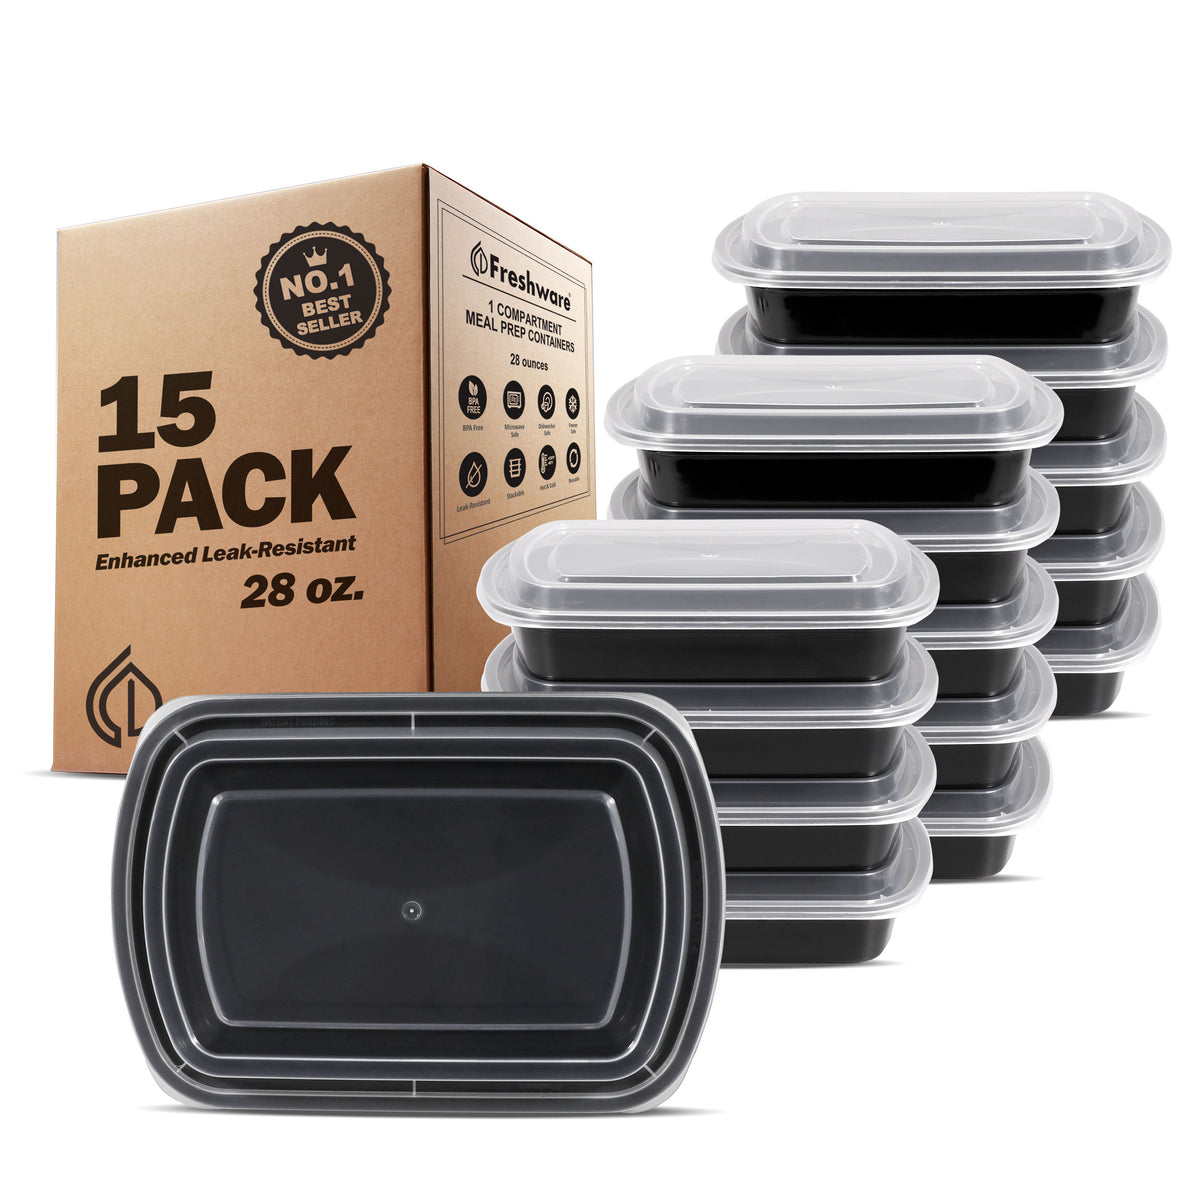 50-Pack Meal Prep Plastic Microwavable Food Containers for Meal Prepping with